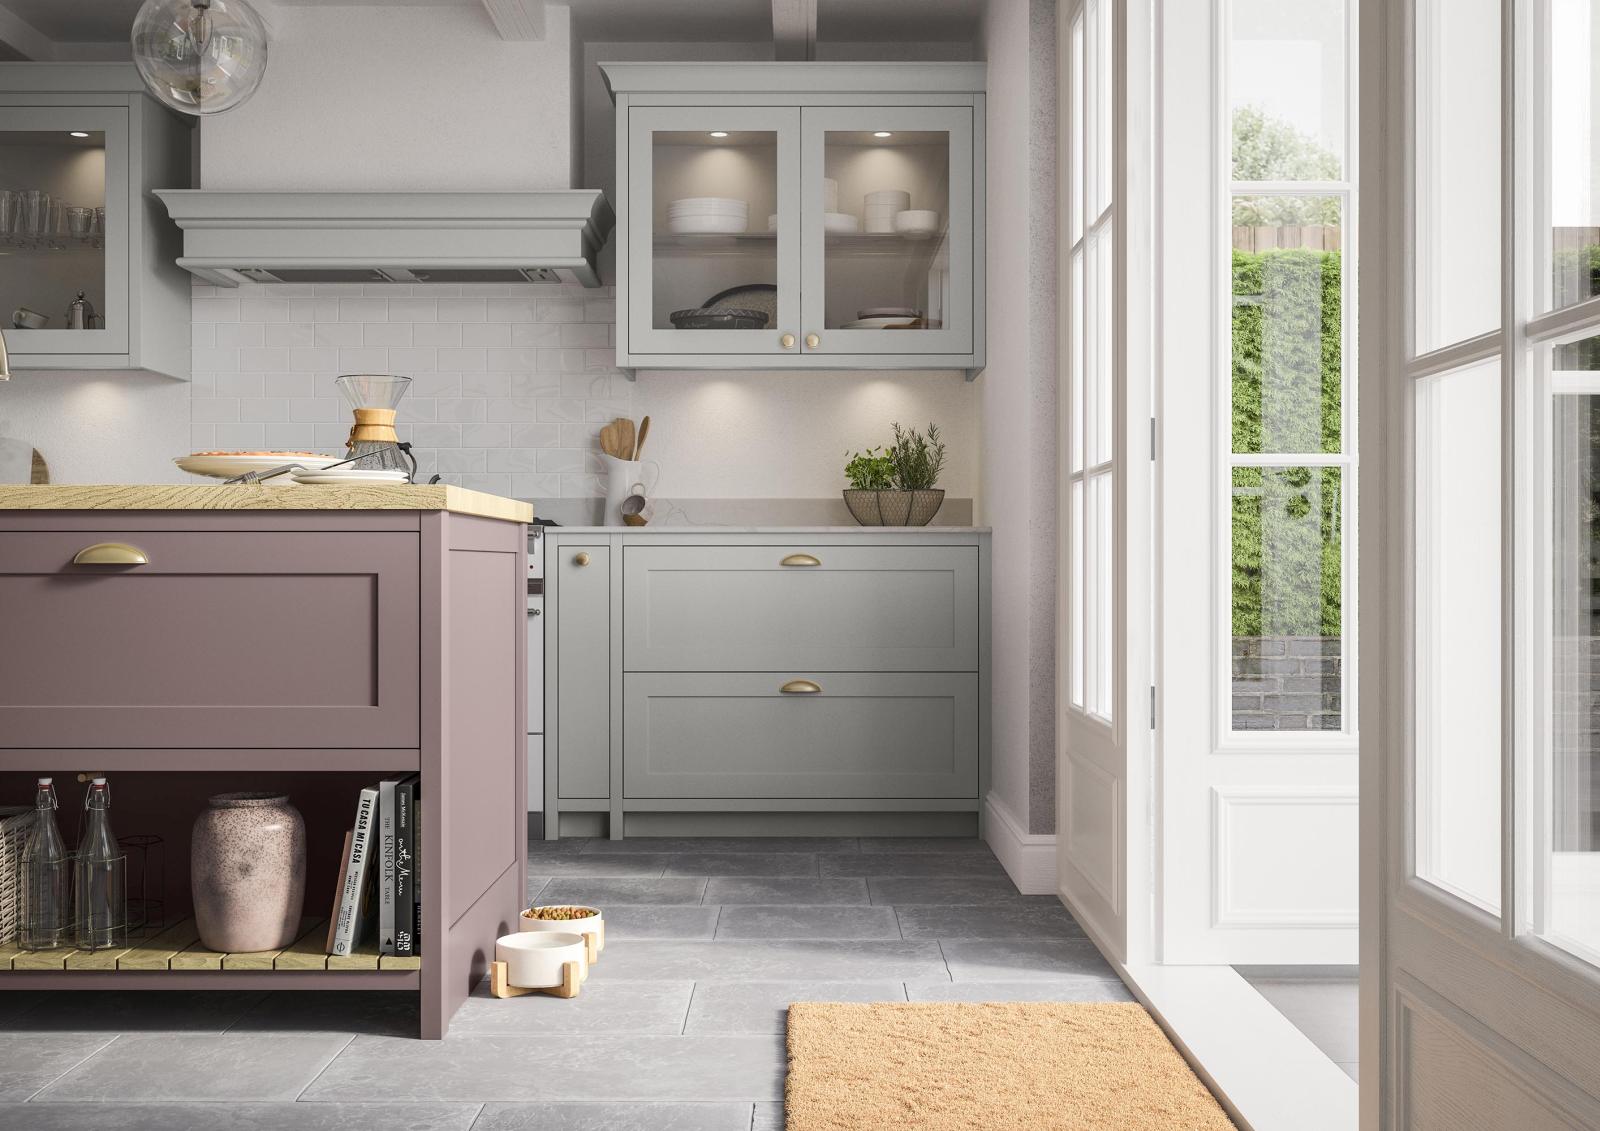 Smooth-finish, slim-frame, shaker-style kitchen painted vintage pink and light grey featuring LED lighting in cabinets to create warmth and ambiance 